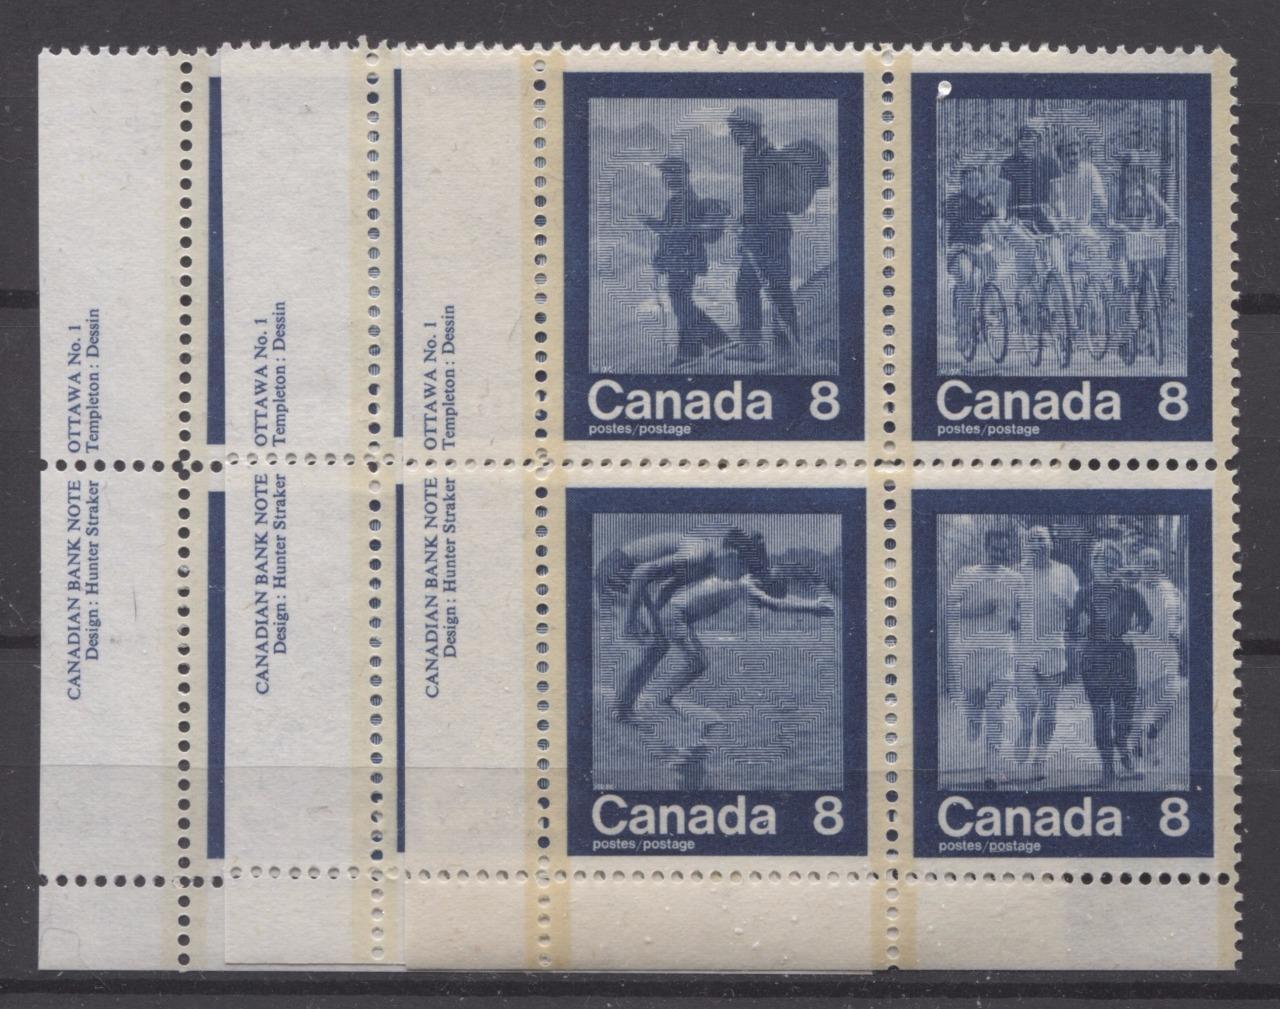 Canada #632a (SG#768a) 1974 Summer Sports Issue Block of 4 Paper/Tag Type 1 Plate 1 UR VF-80 NH Brixton Chrome 